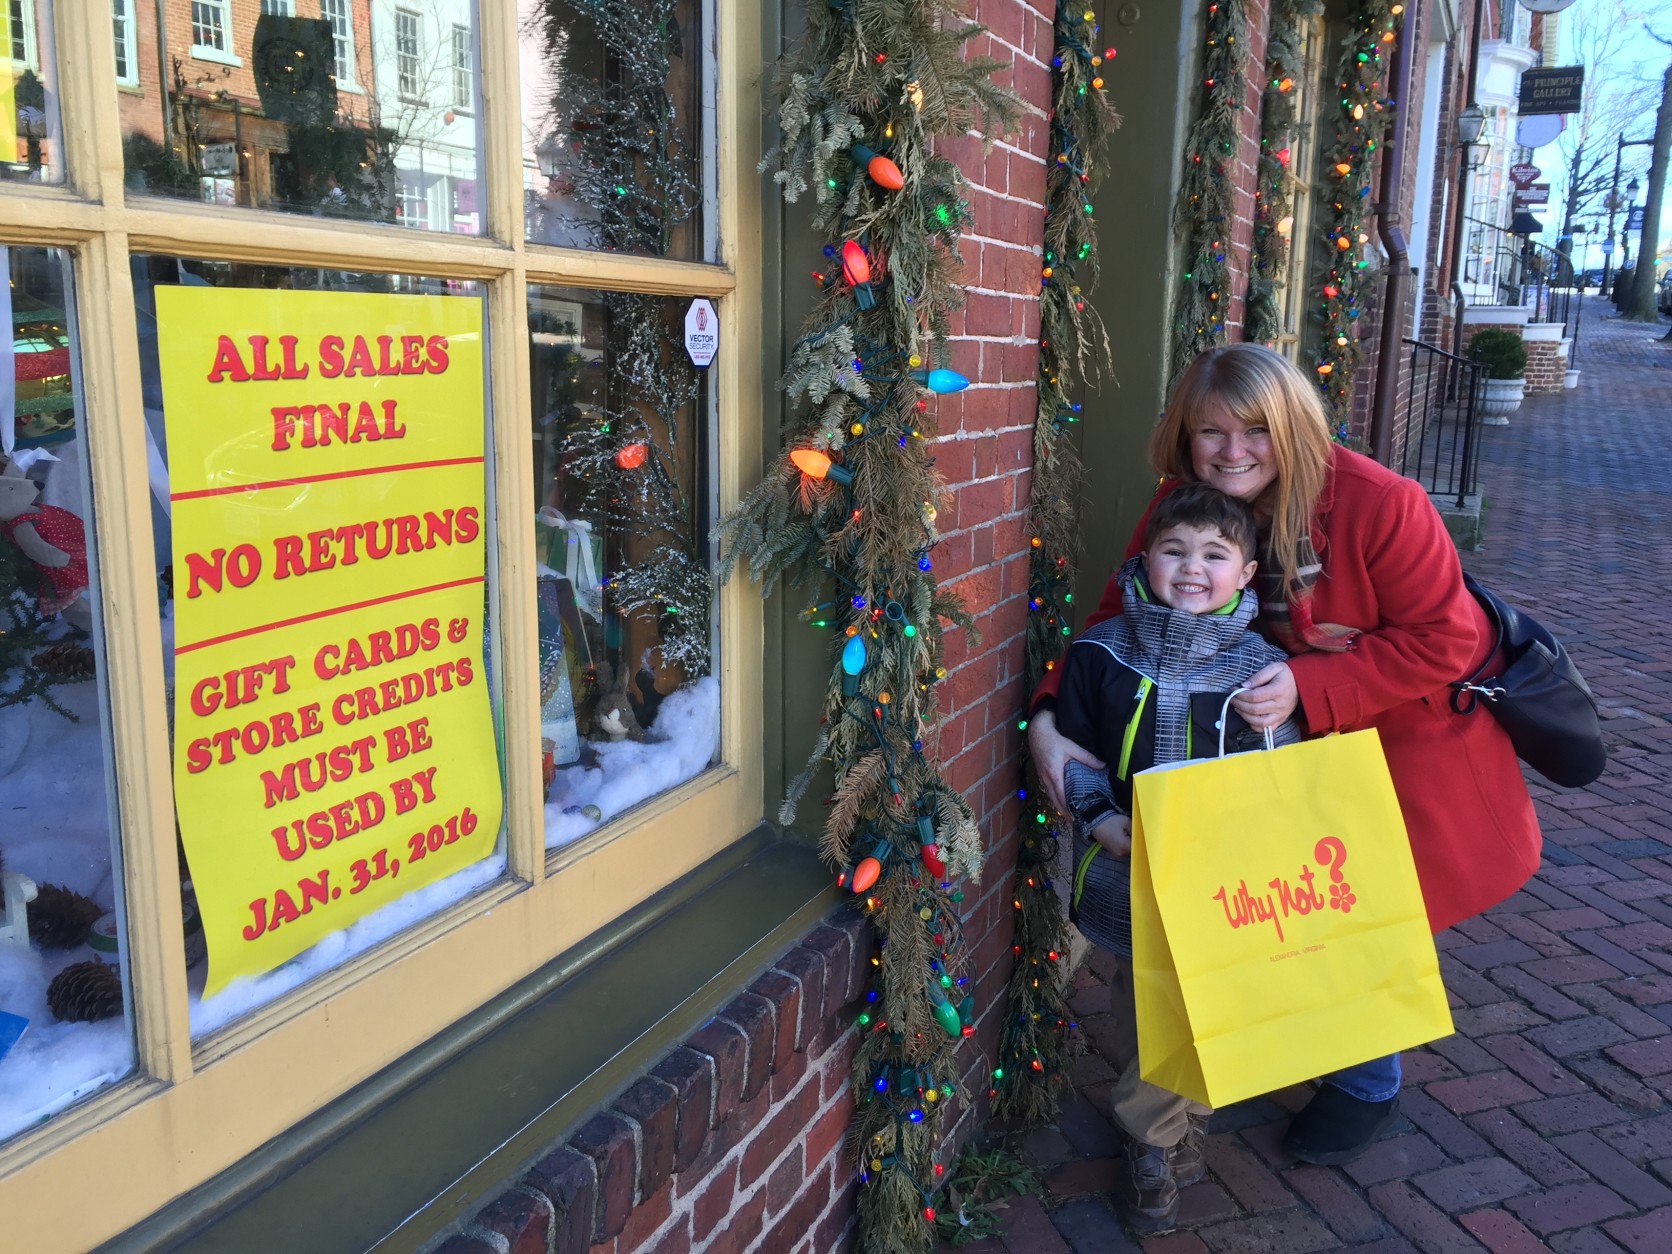 Luke gasped in horror when his mother told him the Why Not? shop is closing. "We've gotten jackets with matching rain boots and books and puzzles. That's a lot of what we buy at the Why Not? shop," says Bethany Harrington. "And for friends, they have the best little baby presents."